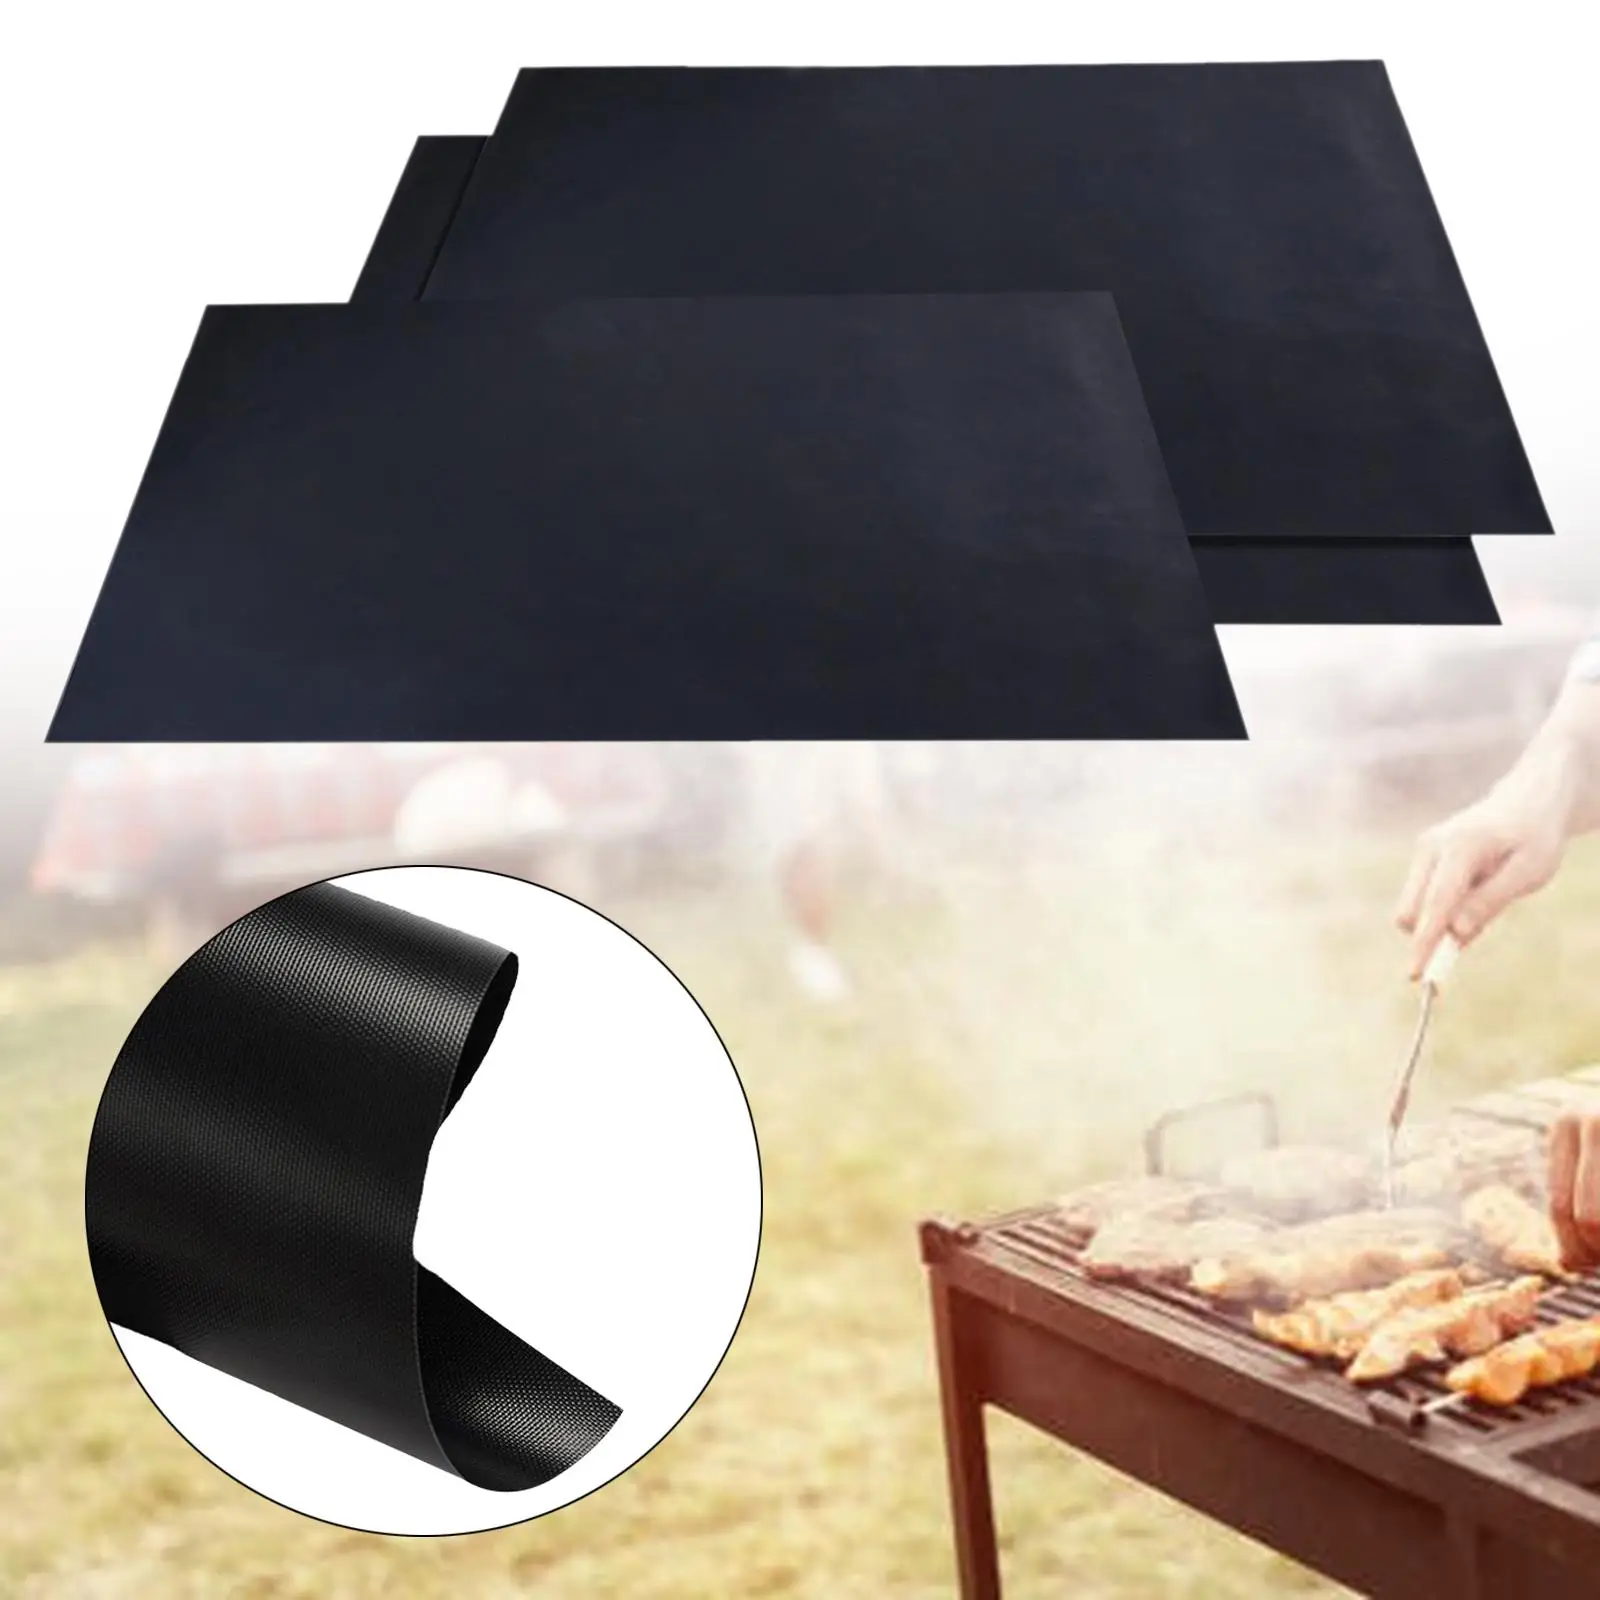 3 Pieces Heavy Duty Baking Sheet Pastry mat Liners Reusable Nonstick grill Mat for Park Pastry Kitchen Camping Cooking